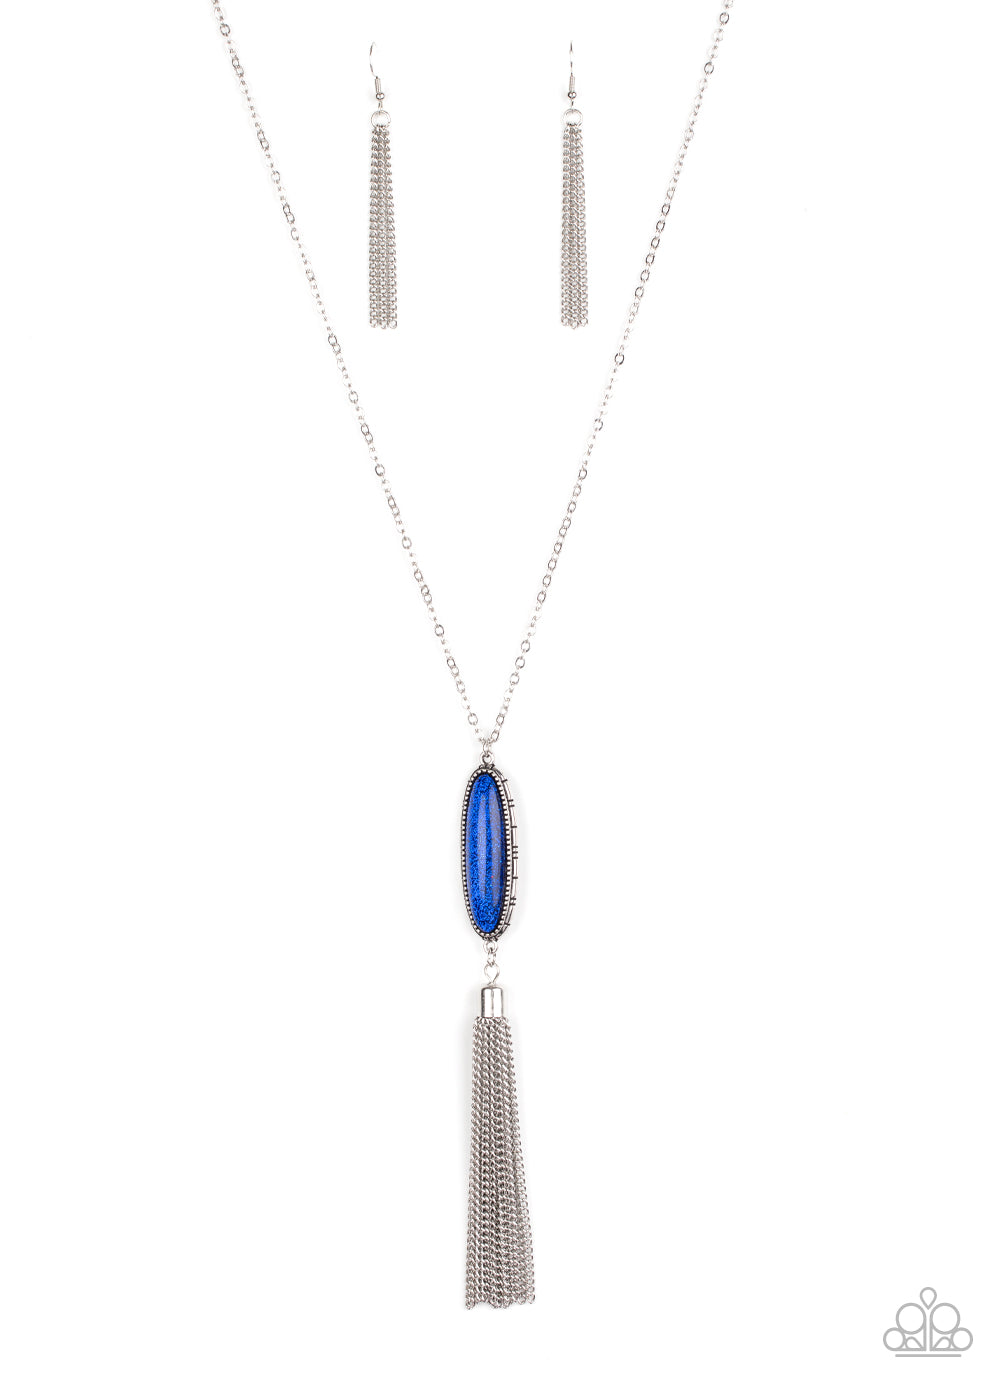 Paparazzi Necklace - Stay Cool - Blue